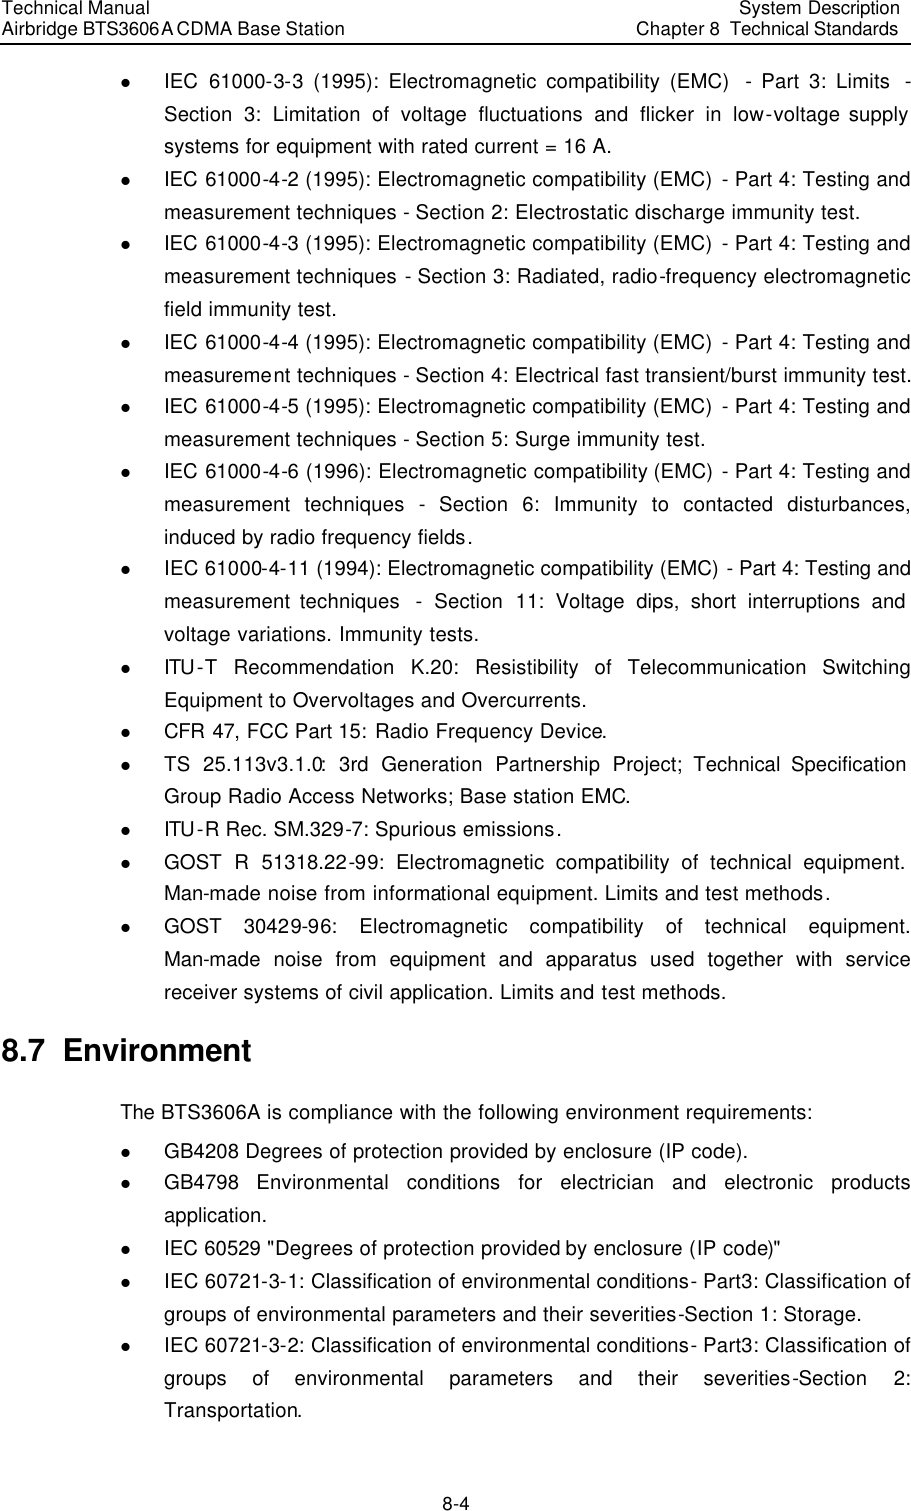 Technical Manual Airbridge BTS3606A CDMA Base Station System Description Chapter 8  Technical Standards   8-4 l IEC 61000-3-3 (1995): Electromagnetic compatibility (EMC)  - Part 3: Limits  - Section 3: Limitation of voltage fluctuations and flicker in low-voltage supply systems for equipment with rated current = 16 A. l IEC 61000-4-2 (1995): Electromagnetic compatibility (EMC)  - Part 4: Testing and measurement techniques - Section 2: Electrostatic discharge immunity test. l IEC 61000-4-3 (1995): Electromagnetic compatibility (EMC)  - Part 4: Testing and measurement techniques - Section 3: Radiated, radio-frequency electromagnetic field immunity test. l IEC 61000-4-4 (1995): Electromagnetic compatibility (EMC)  - Part 4: Testing and measurement techniques - Section 4: Electrical fast transient/burst immunity test. l IEC 61000-4-5 (1995): Electromagnetic compatibility (EMC)  - Part 4: Testing and measurement techniques - Section 5: Surge immunity test. l IEC 61000-4-6 (1996): Electromagnetic compatibility (EMC)  - Part 4: Testing and measurement techniques - Section 6: Immunity to contacted disturbances, induced by radio frequency fields. l IEC 61000-4-11 (1994): Electromagnetic compatibility (EMC) - Part 4: Testing and measurement techniques  - Section 11: Voltage dips, short interruptions and voltage variations. Immunity tests. l ITU -T Recommendation K.20: Resistibility of Telecommunication Switching Equipment to Overvoltages and Overcurrents. l CFR 47, FCC Part 15: Radio Frequency Device. l TS 25.113v3.1.0: 3rd Generation Partnership Project; Technical Specification Group Radio Access Networks; Base station EMC. l ITU -R Rec. SM.329-7: Spurious emissions. l GOST R 51318.22-99: Electromagnetic compatibility of technical equipment. Man-made noise from informational equipment. Limits and test methods. l GOST 30429-96: Electromagnetic compatibility of technical equipment. Man-made noise from equipment and apparatus used together with service receiver systems of civil application. Limits and test methods. 8.7  Environment The BTS3606A is compliance with the following environment requirements: l GB4208 Degrees of protection provided by enclosure (IP code). l GB4798  Environmental conditions for electrician and electronic products application. l IEC 60529 &quot;Degrees of protection provided by enclosure (IP code)&quot; l IEC 60721-3-1: Classification of environmental conditions- Part3: Classification of groups of environmental parameters and their severities-Section 1: Storage. l IEC 60721-3-2: Classification of environmental conditions- Part3: Classification of groups of environmental parameters and their severities-Section 2: Transportation. 